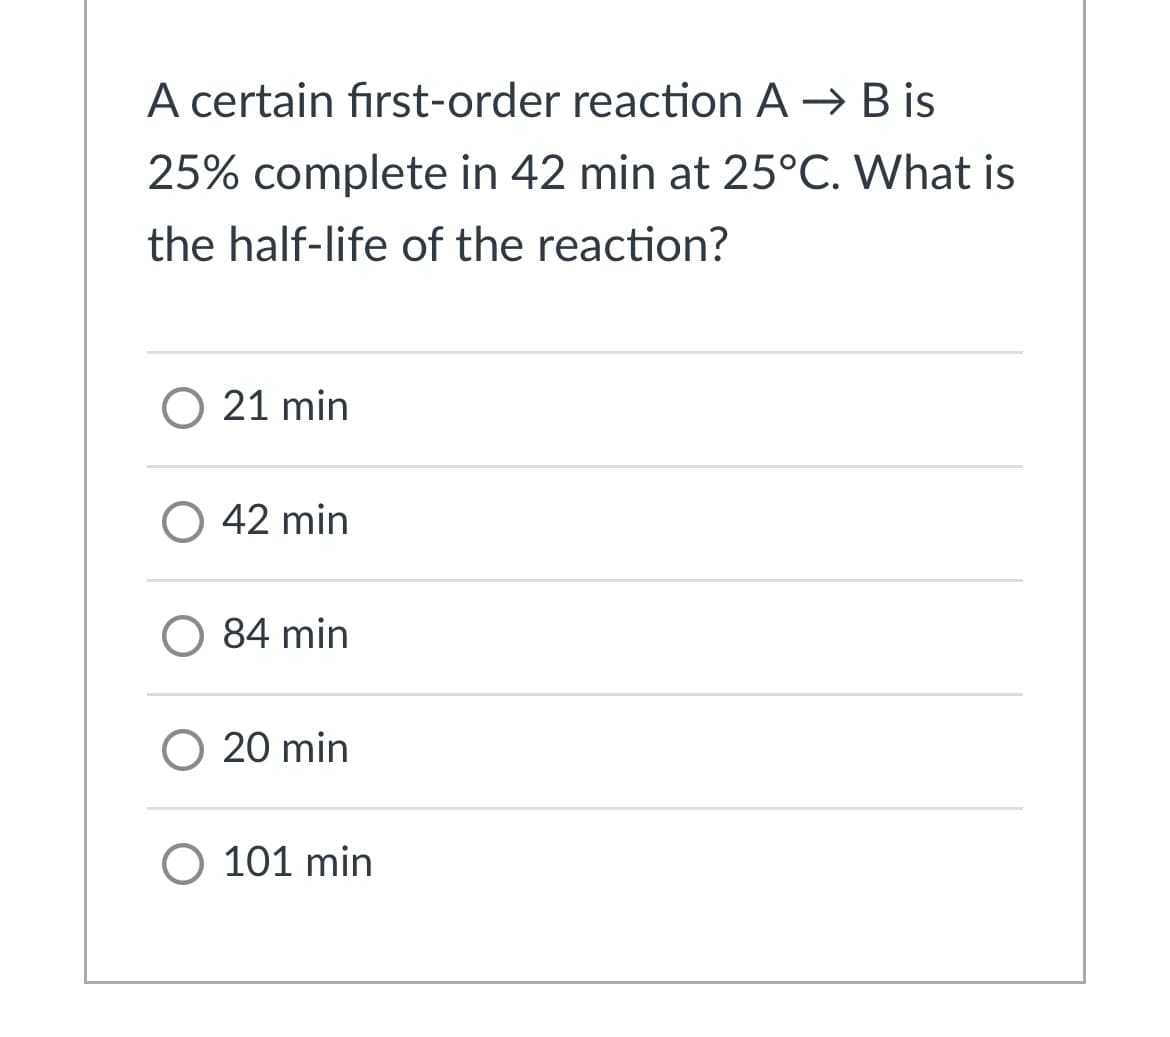 A certain fırst-order reaction A → B is
25% complete in 42 min at 25°C. What is
the half-life of the reaction?
O 21 min
O 42 min
84 min
O 20 min
O 101 min
